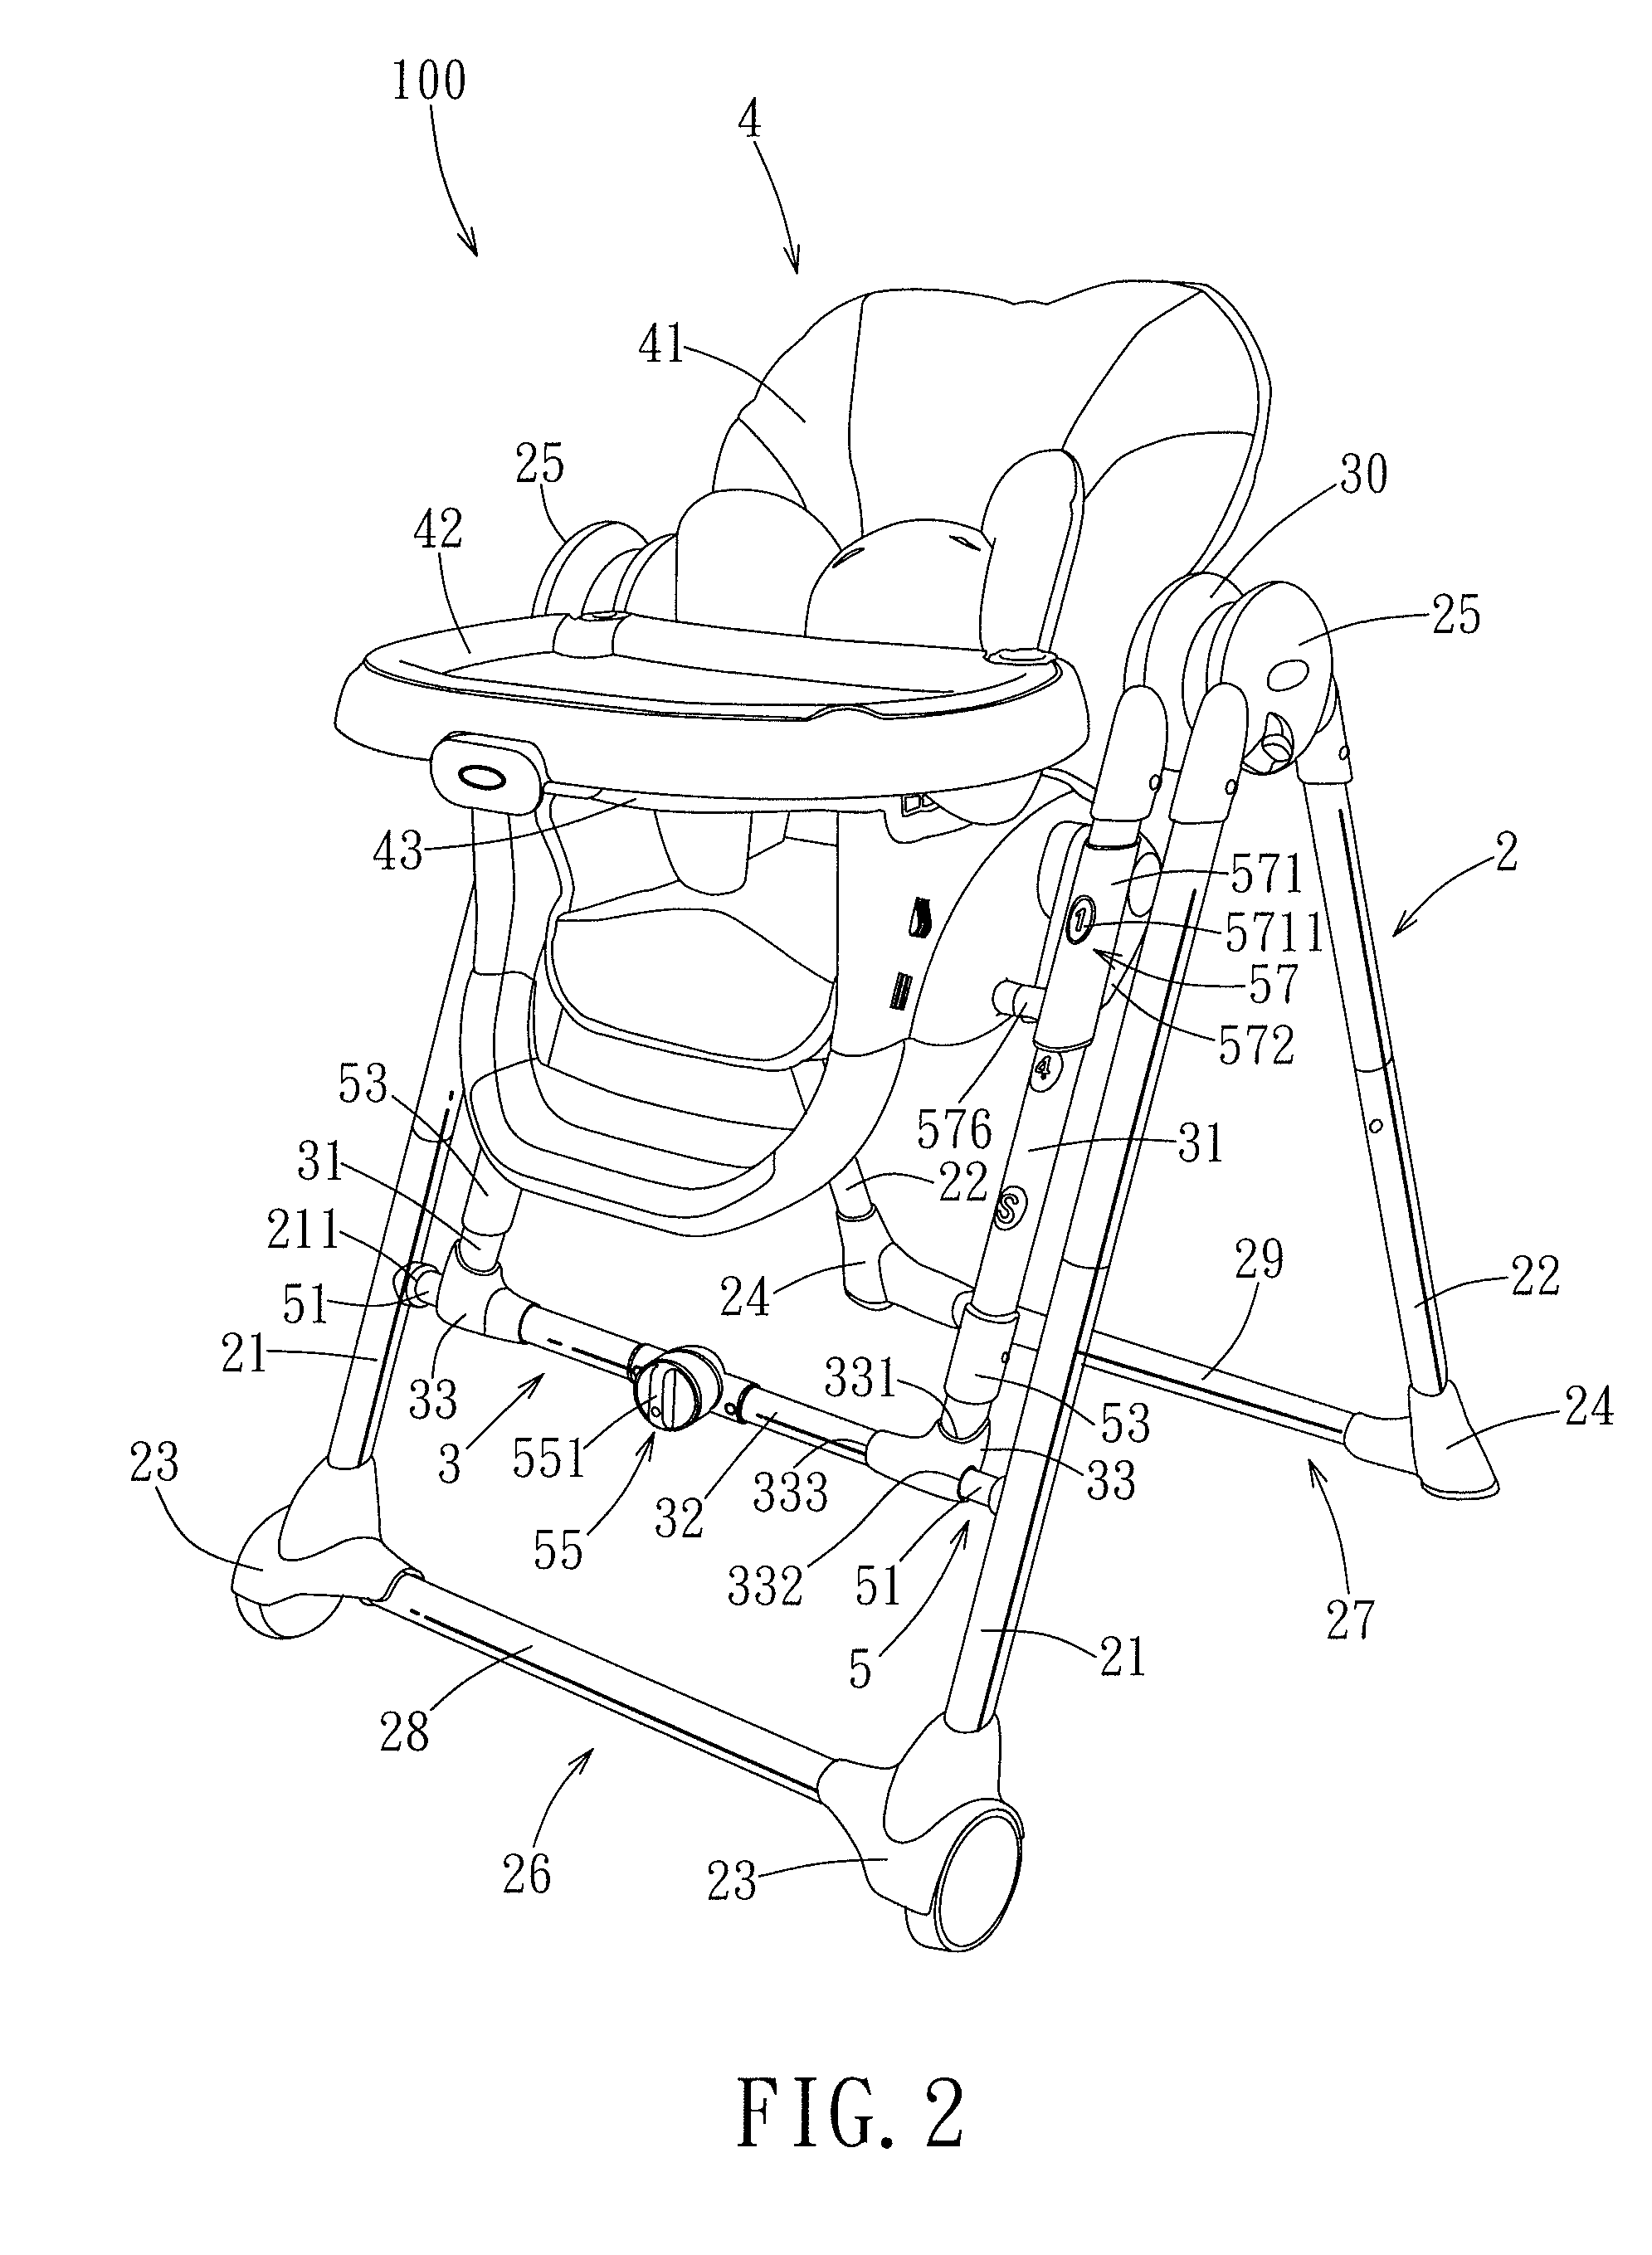 Child seat convertible between a high chair configuration and a swing configuration and method of conversion thereof